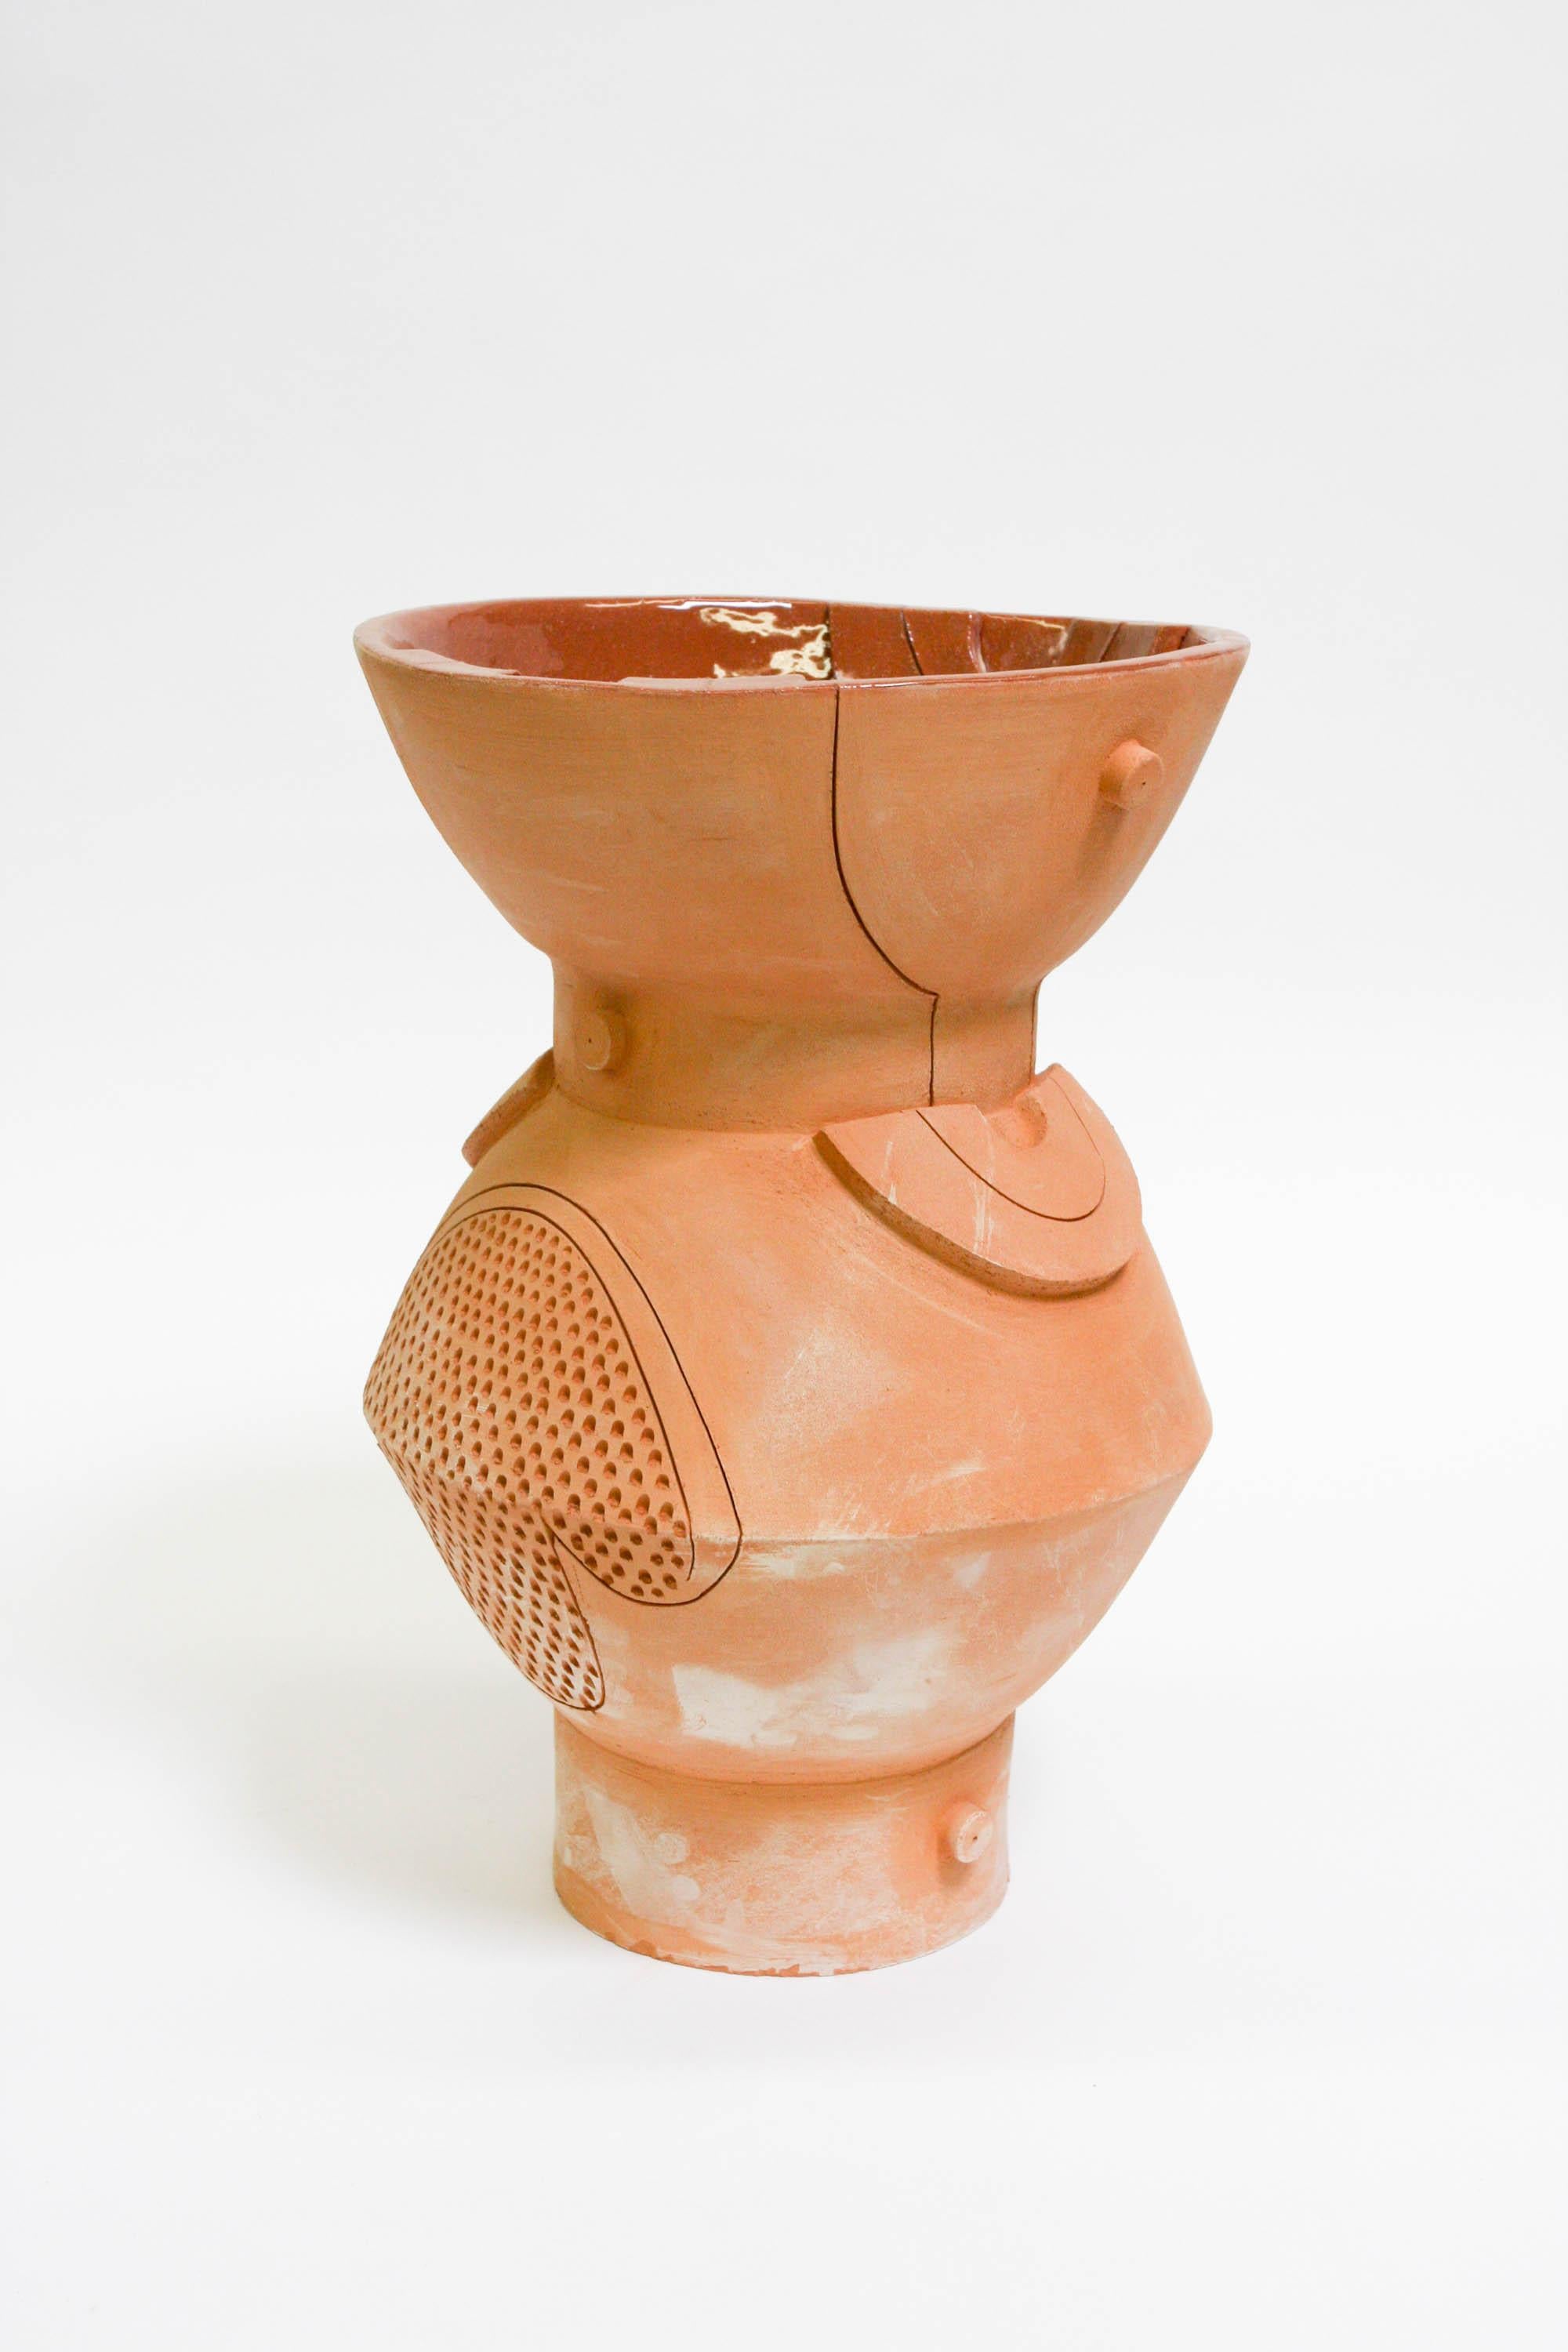 Futurist extra large double circle terracotta planter, raw terracotta 14 x 22?

Unlimited terracotta editions, individual vases are unique in size and shape. Hole at bottom for water drainage, outdoor and indoor use. Not meant for outdoor use in